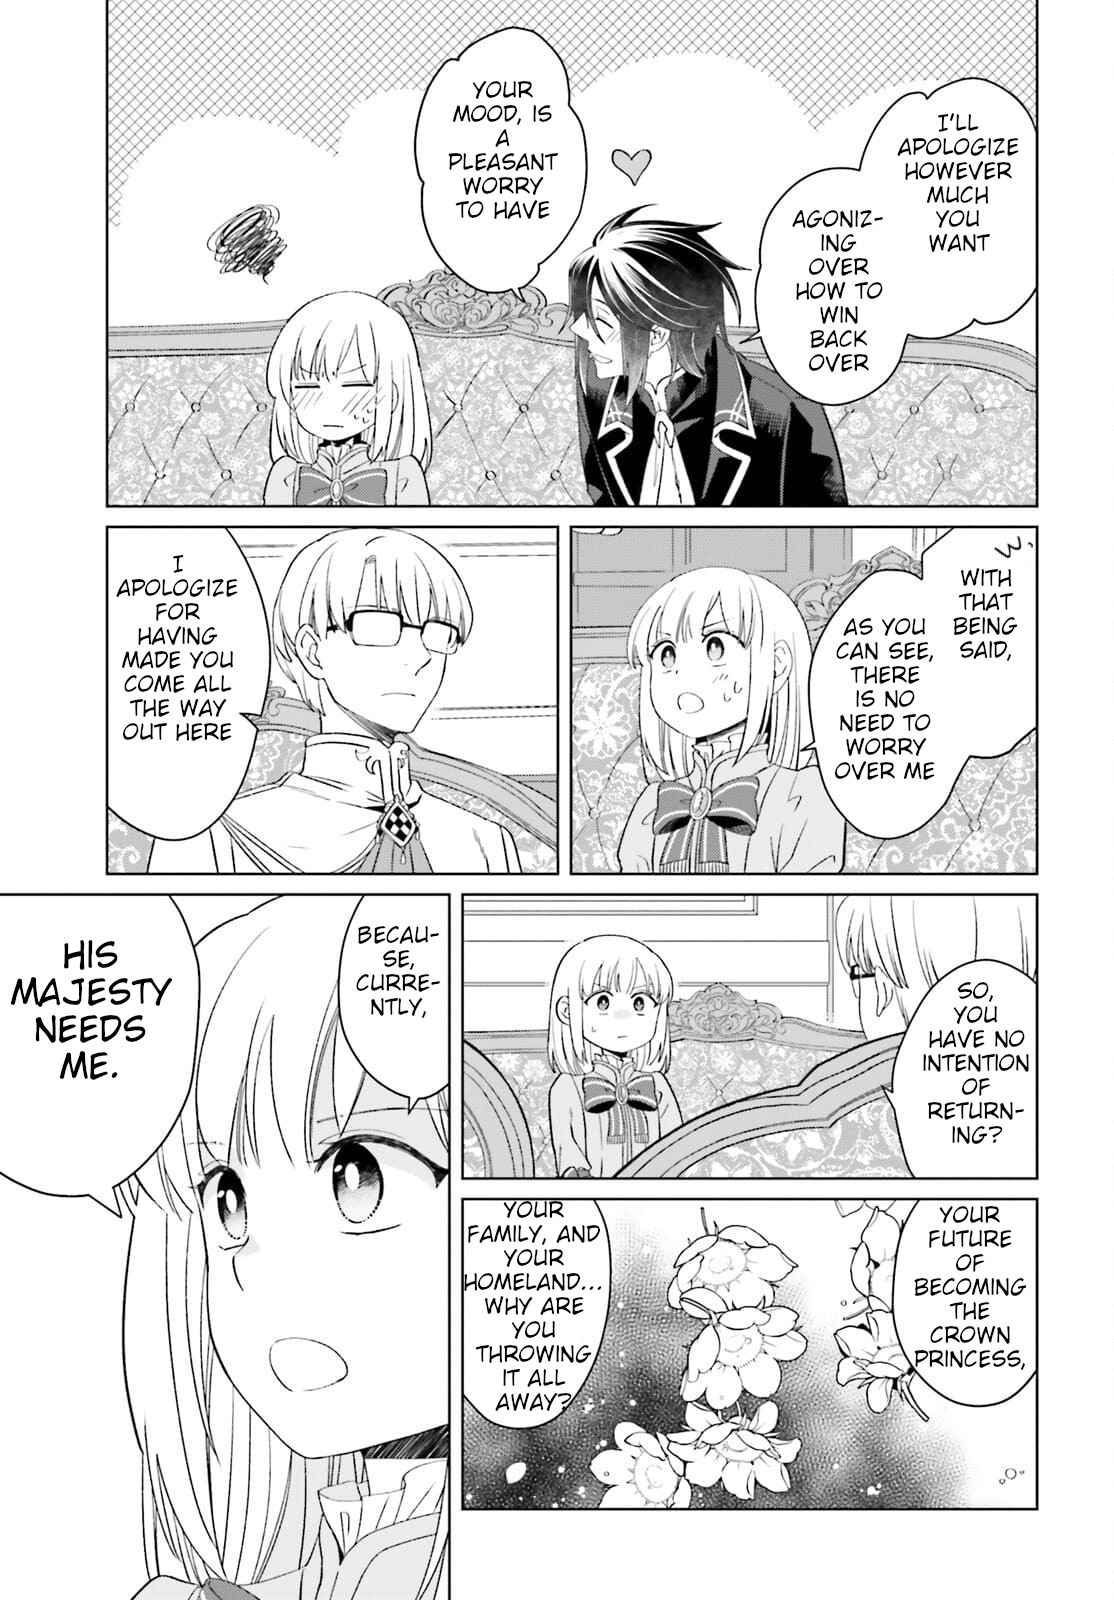 Win Over The Dragon Emperor This Time Around, Noble Girl! - 11 page 27-f8fa214b